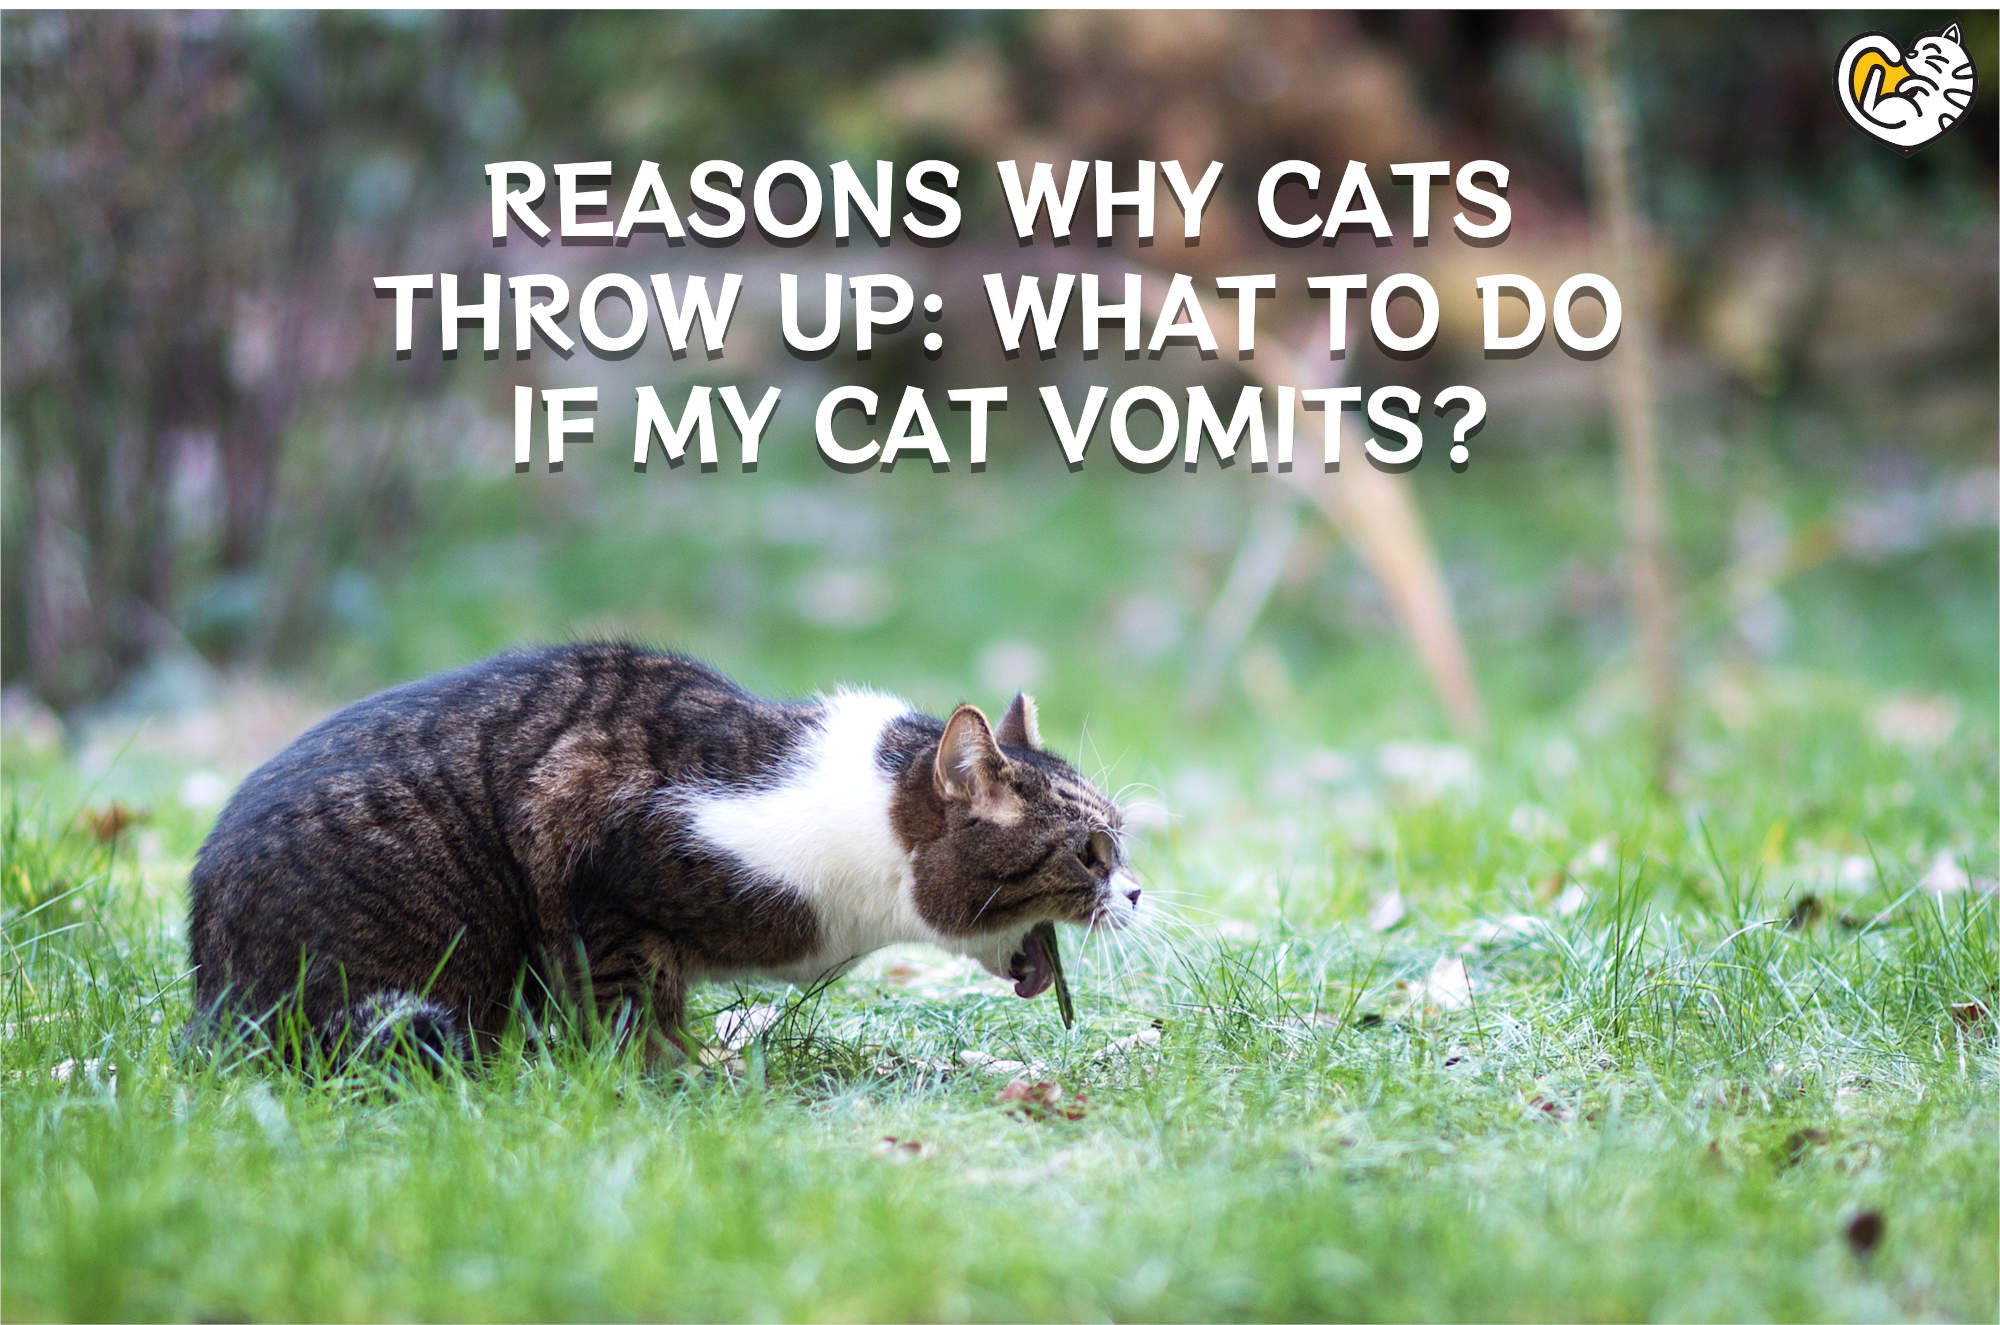 Why Cats Throw Up: What To Do If My Cat Vomits?